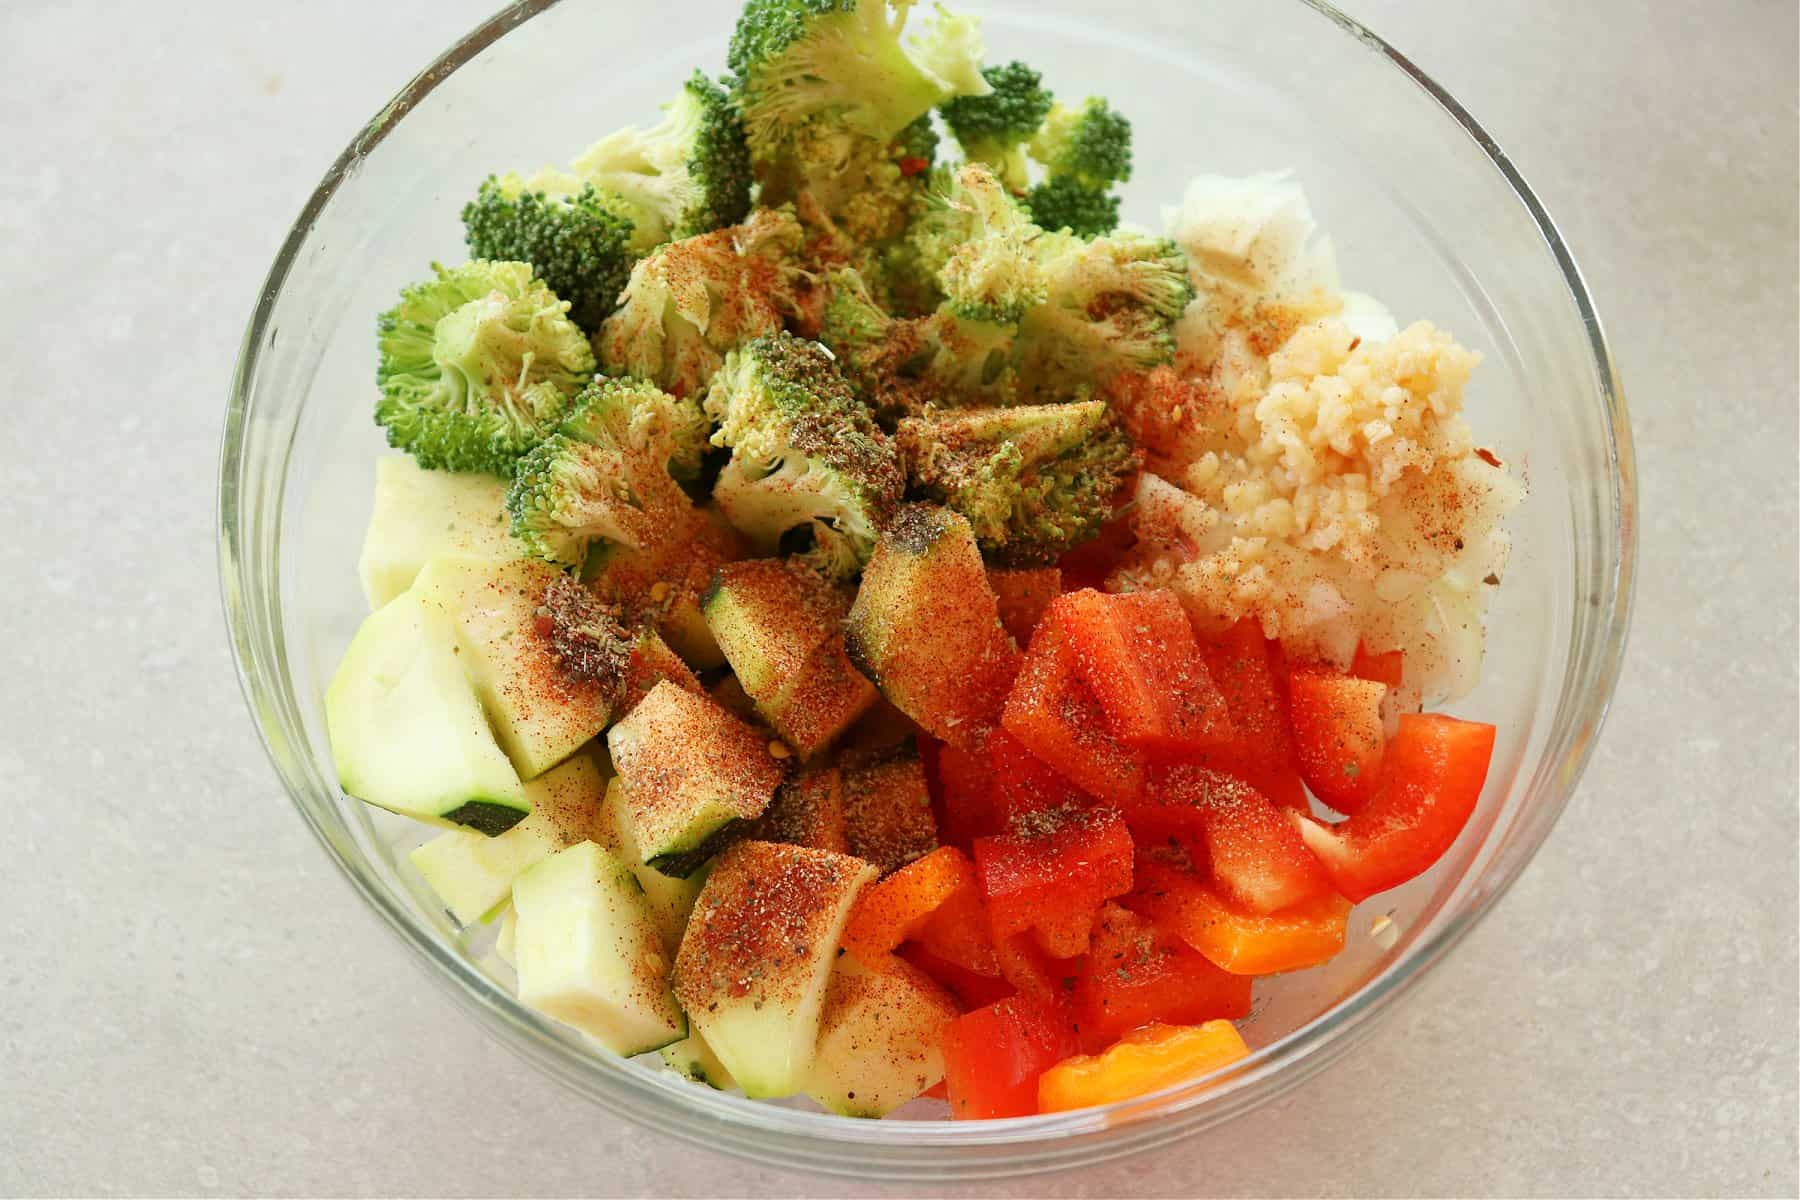 Chopped raw vegetables with seasoning in a glass bowl.